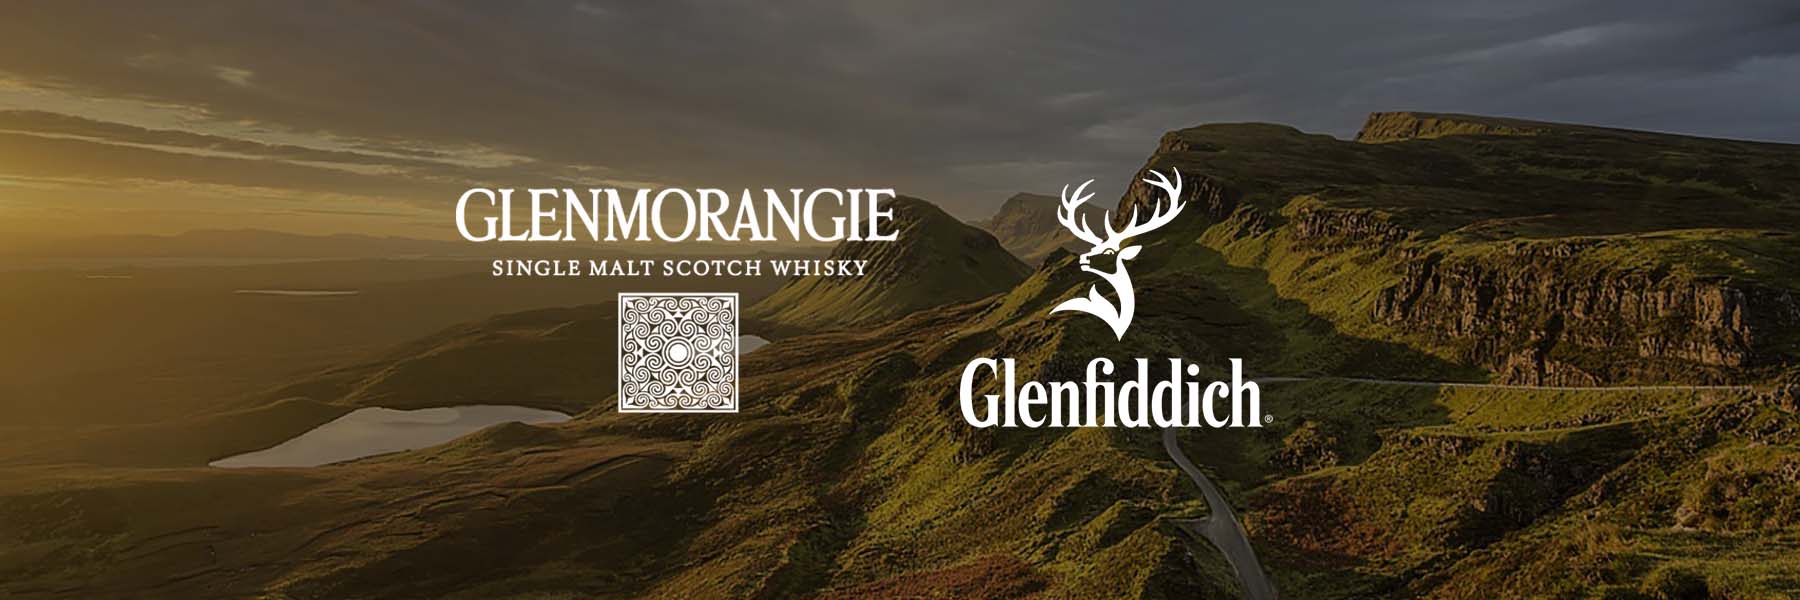 Glenmorangie vs Glenfiddich: Which Glen will come out on top?